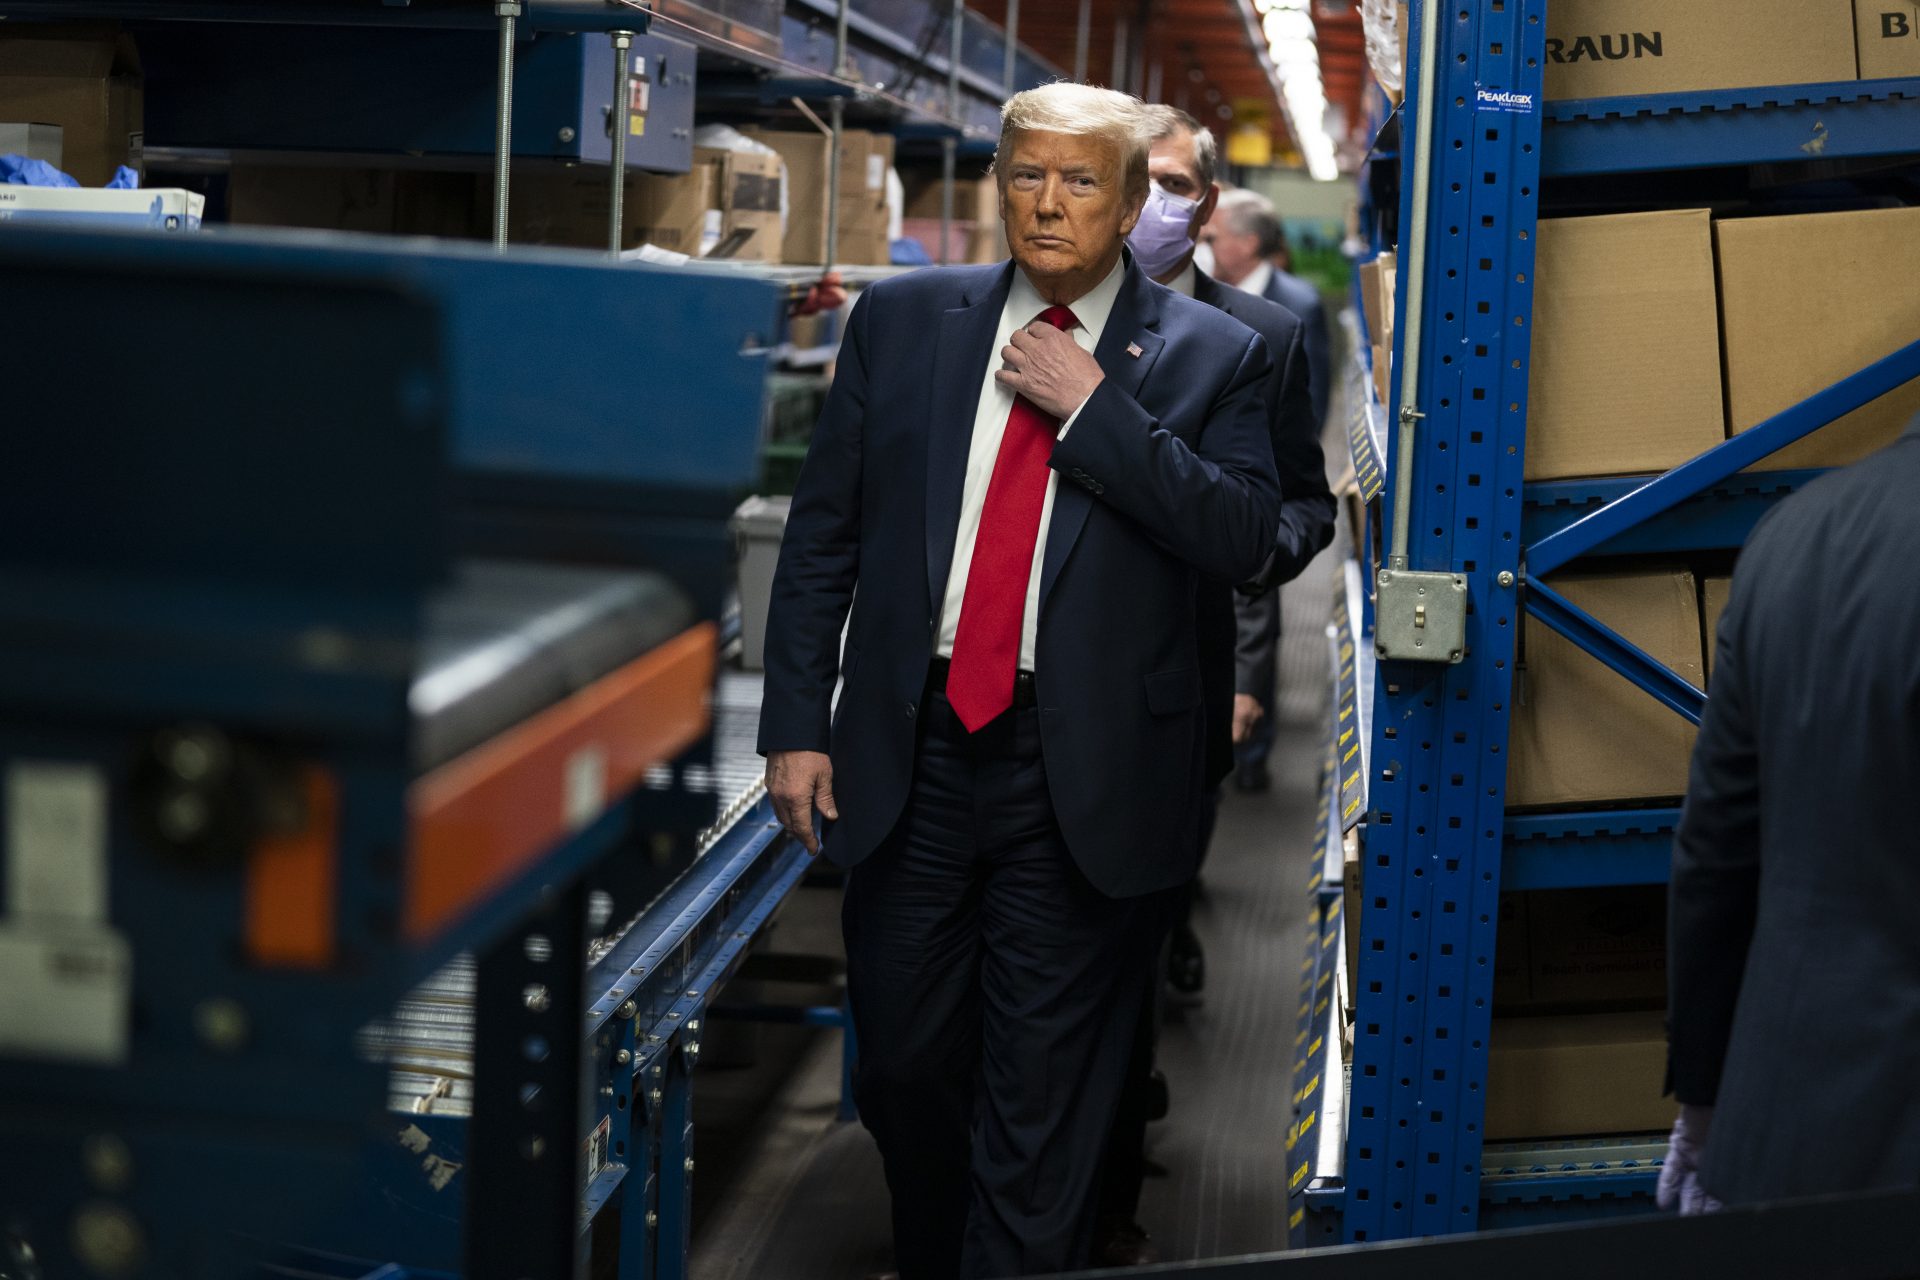 President Donald Trump adjusts his tie during a tour of Owens & Minor Inc., a medical supply company, Thursday, May 14, 2020, in Allentown,